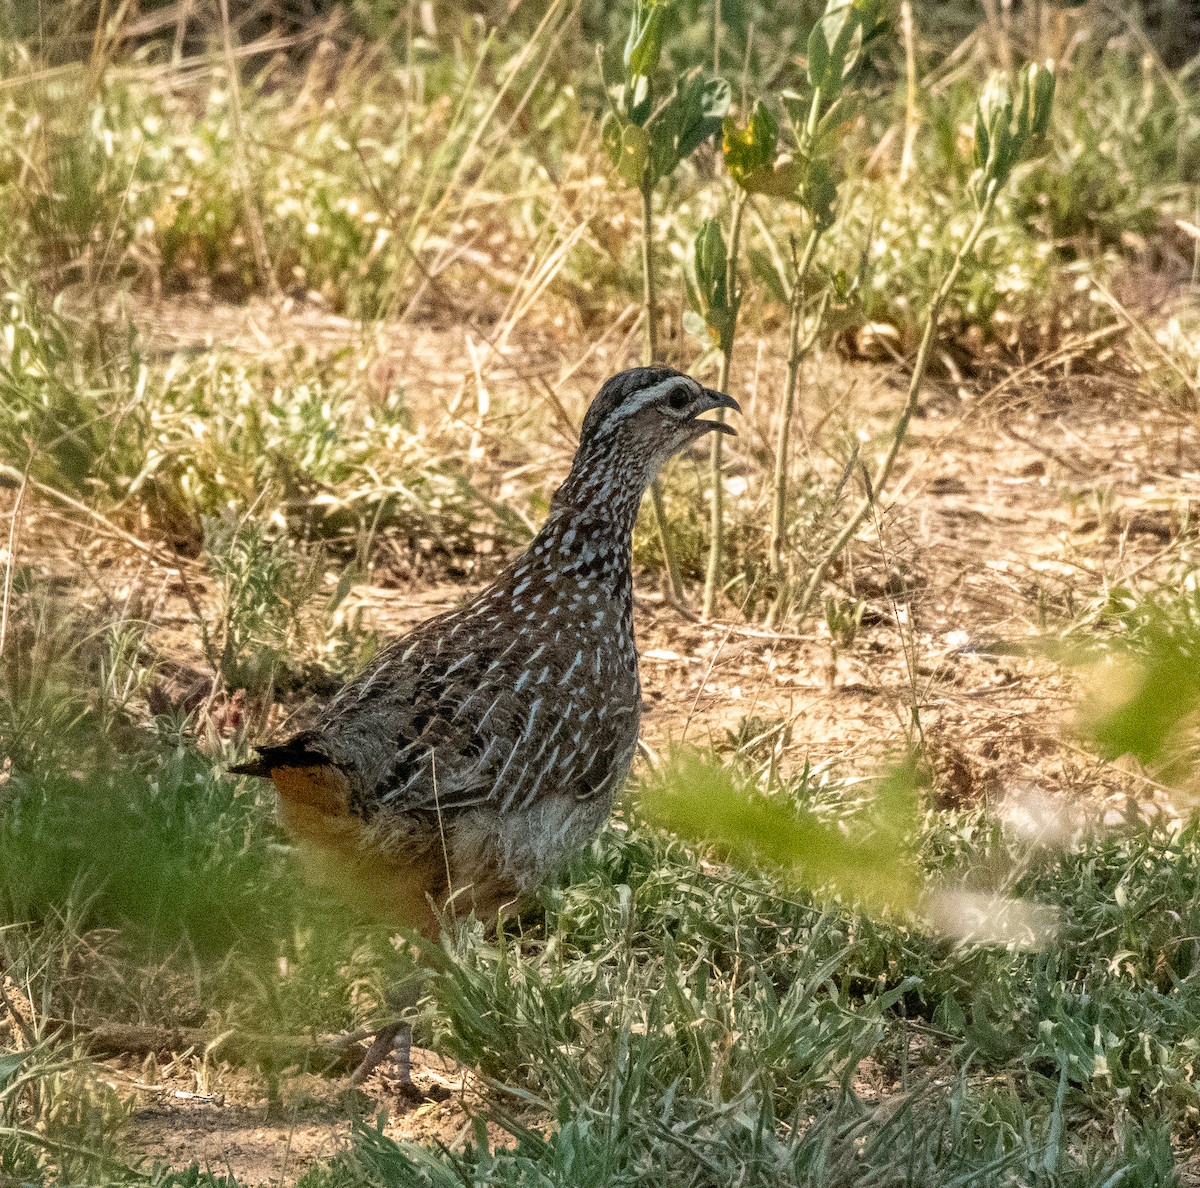 Crested Francolin (Crested) - Gallus Quigley